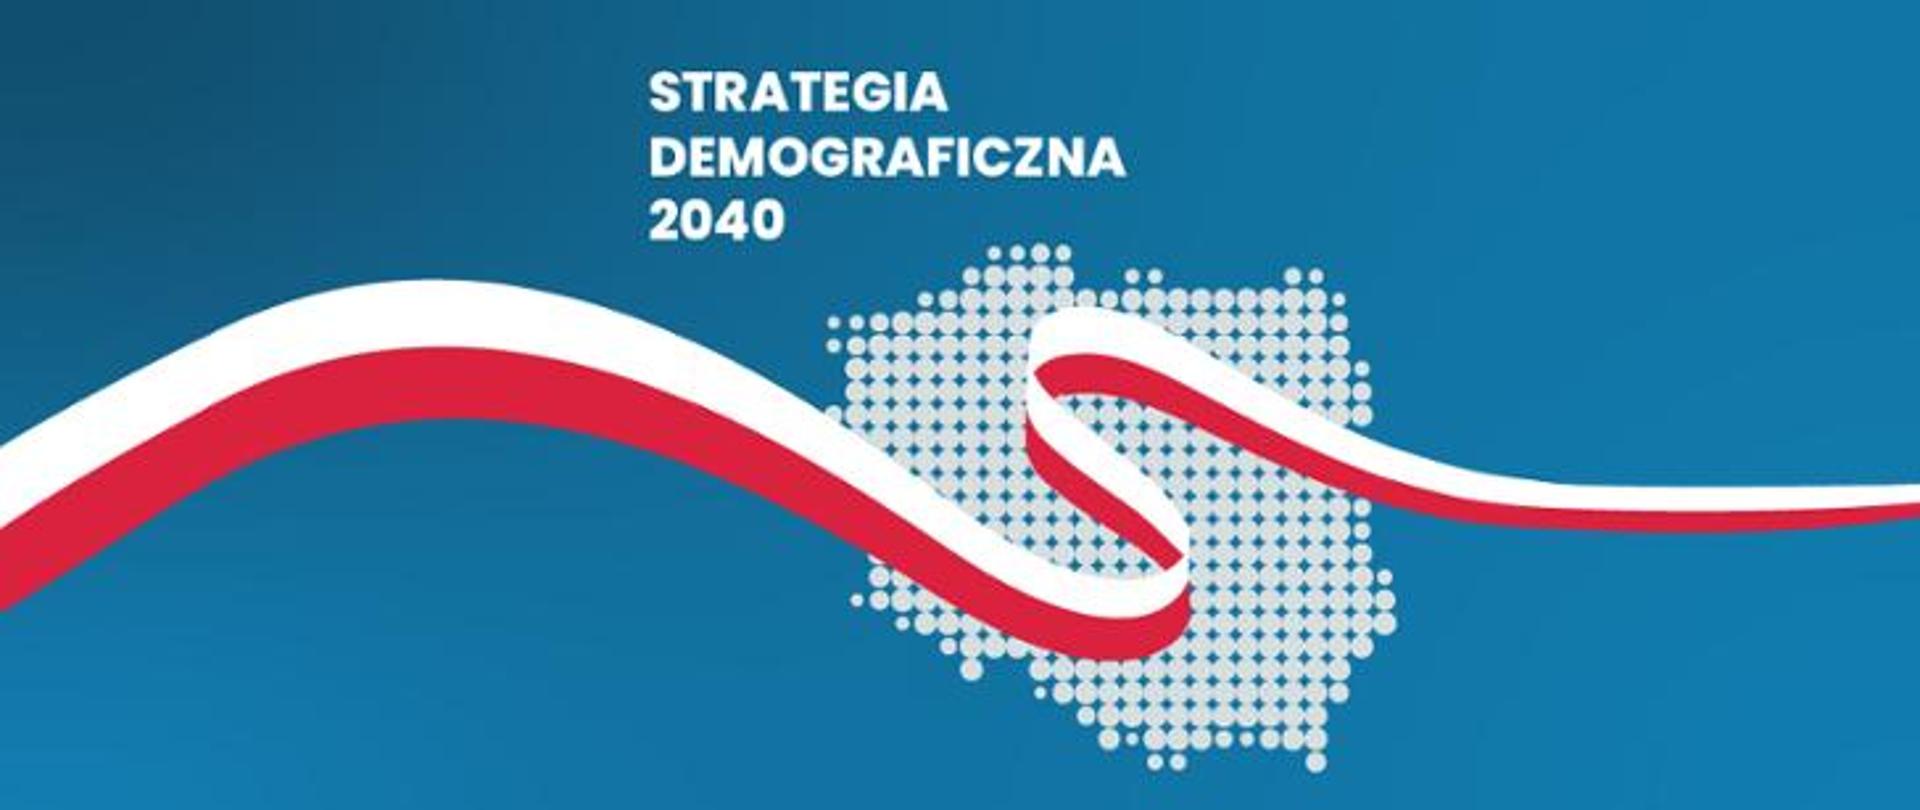 Demographic Strategy. Social consultations of the document are launched